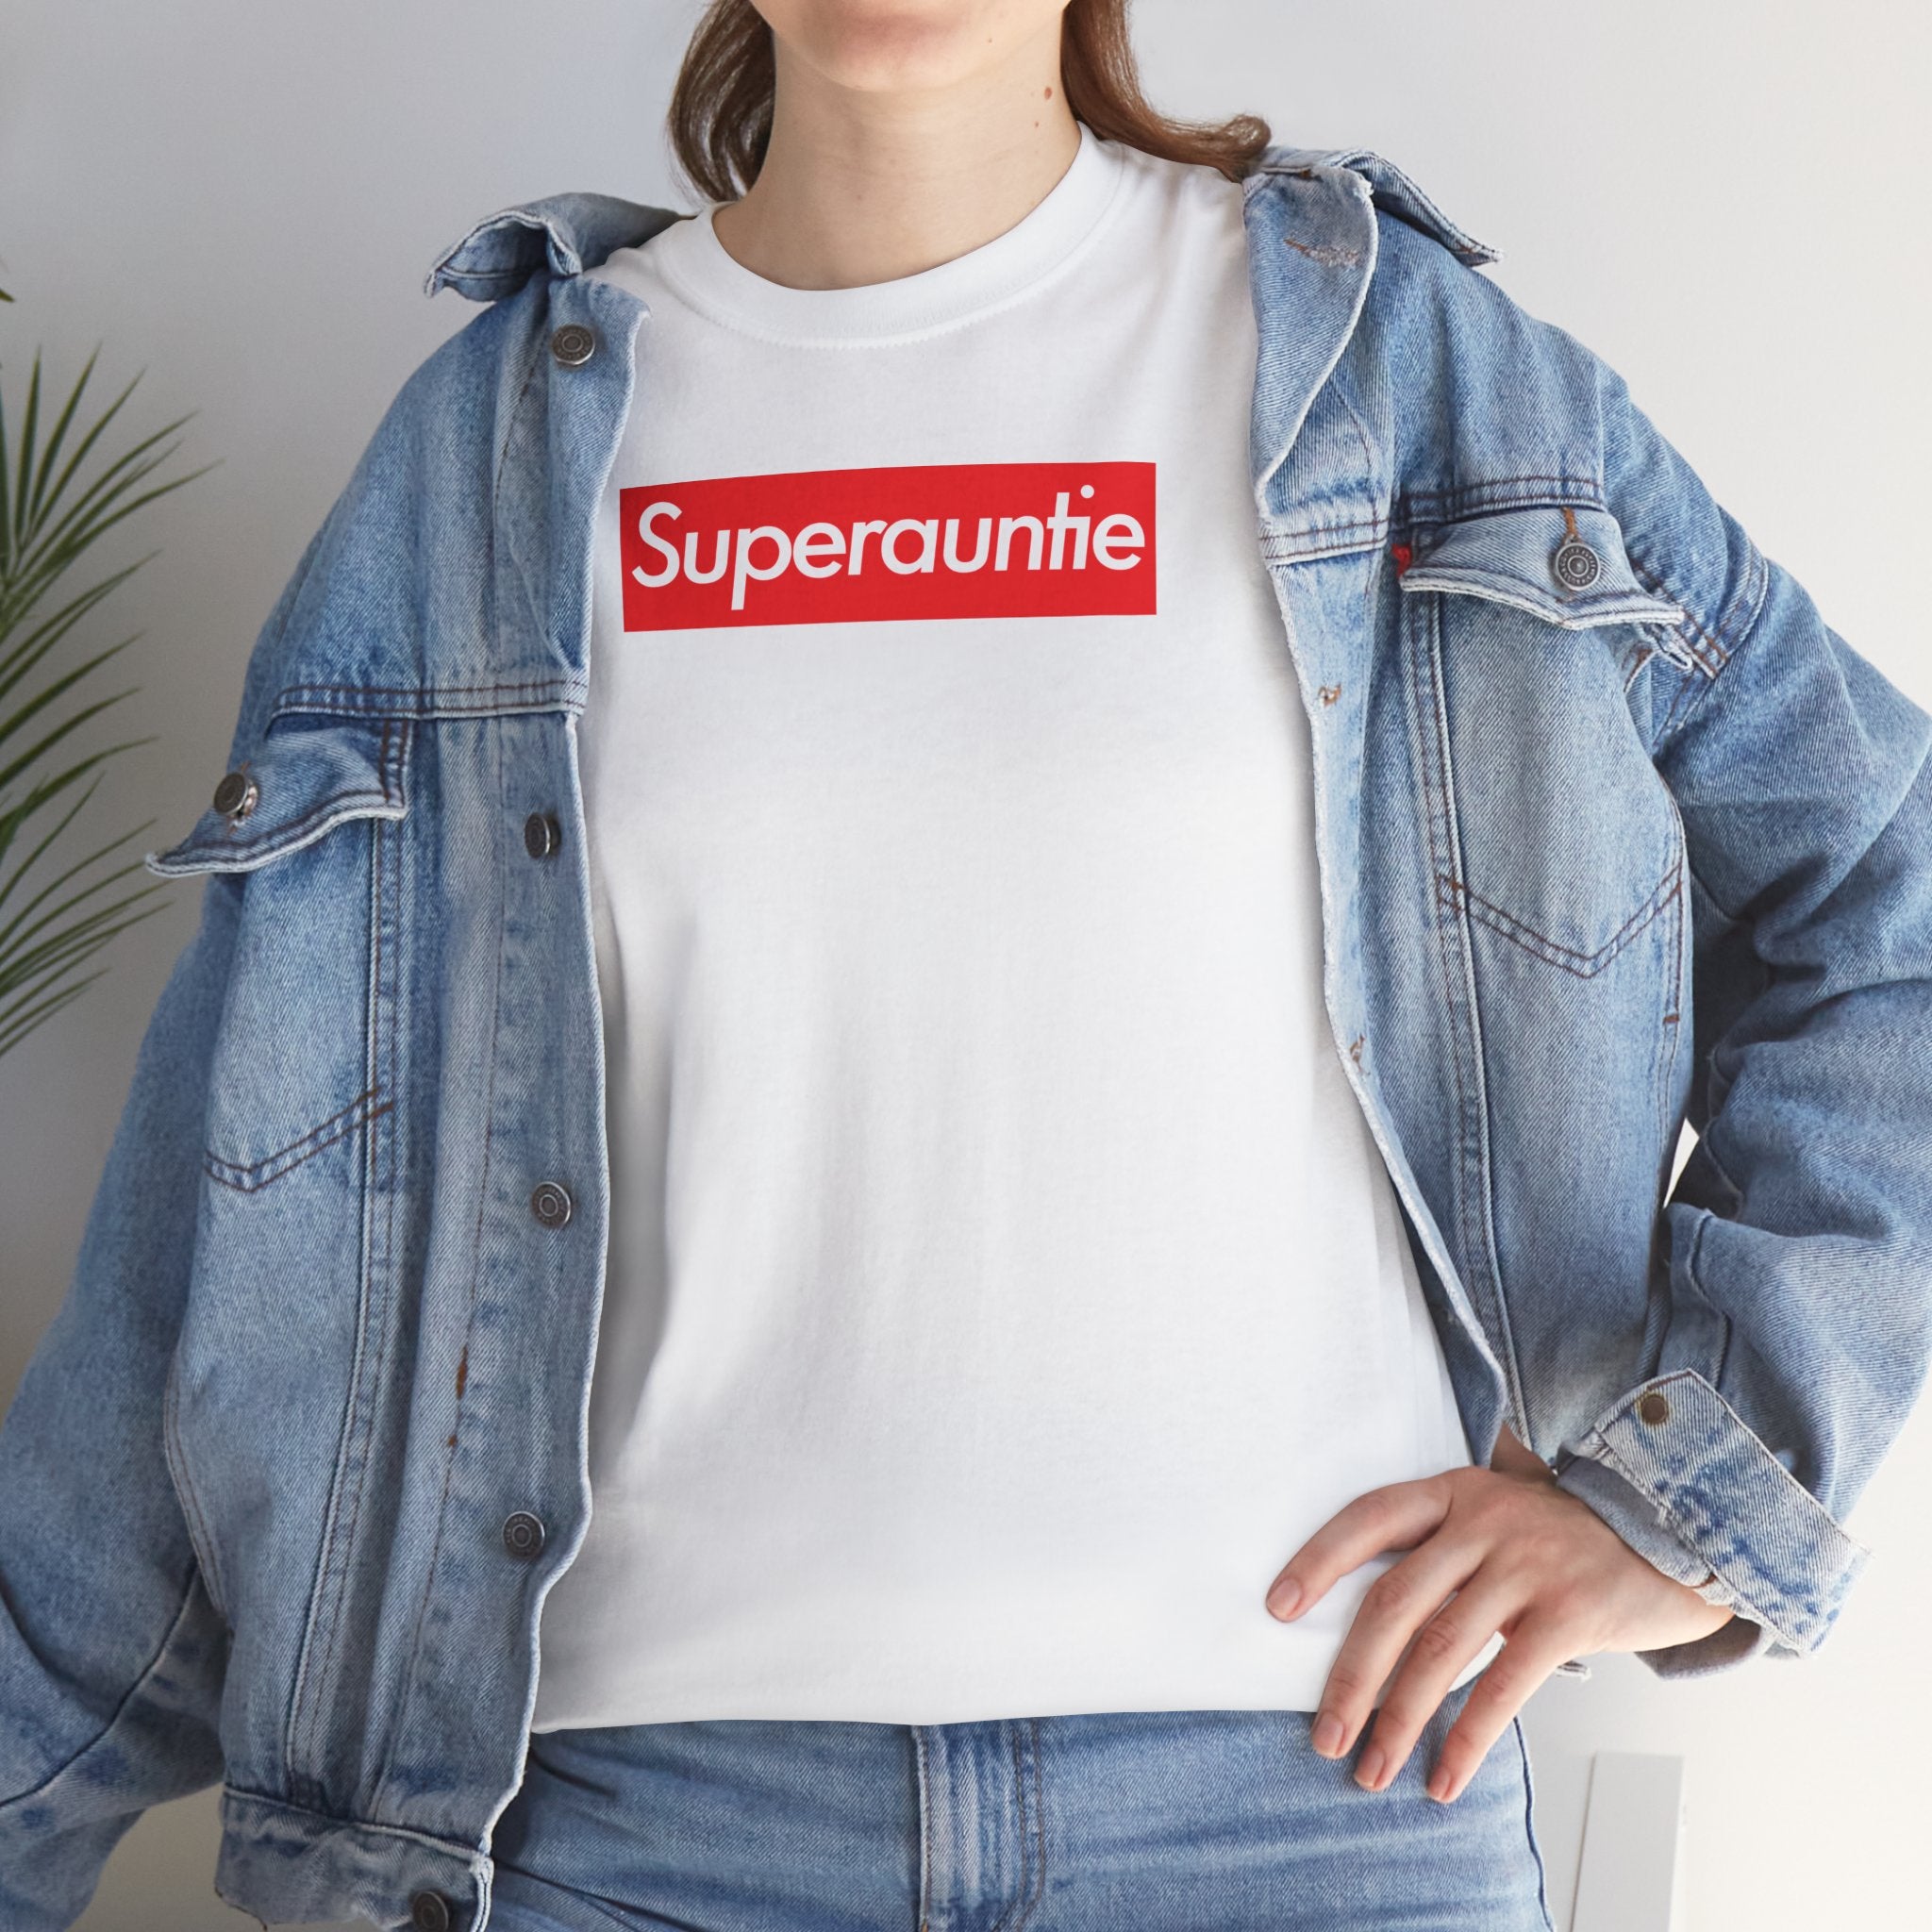 Superauntie Unisex Heavy Cotton Tee Shirt T-shirt super Inspired Funny Auntie Aunt Appreciation Gift For Aunties Aunts Thank You Thankful Birthday Christmas